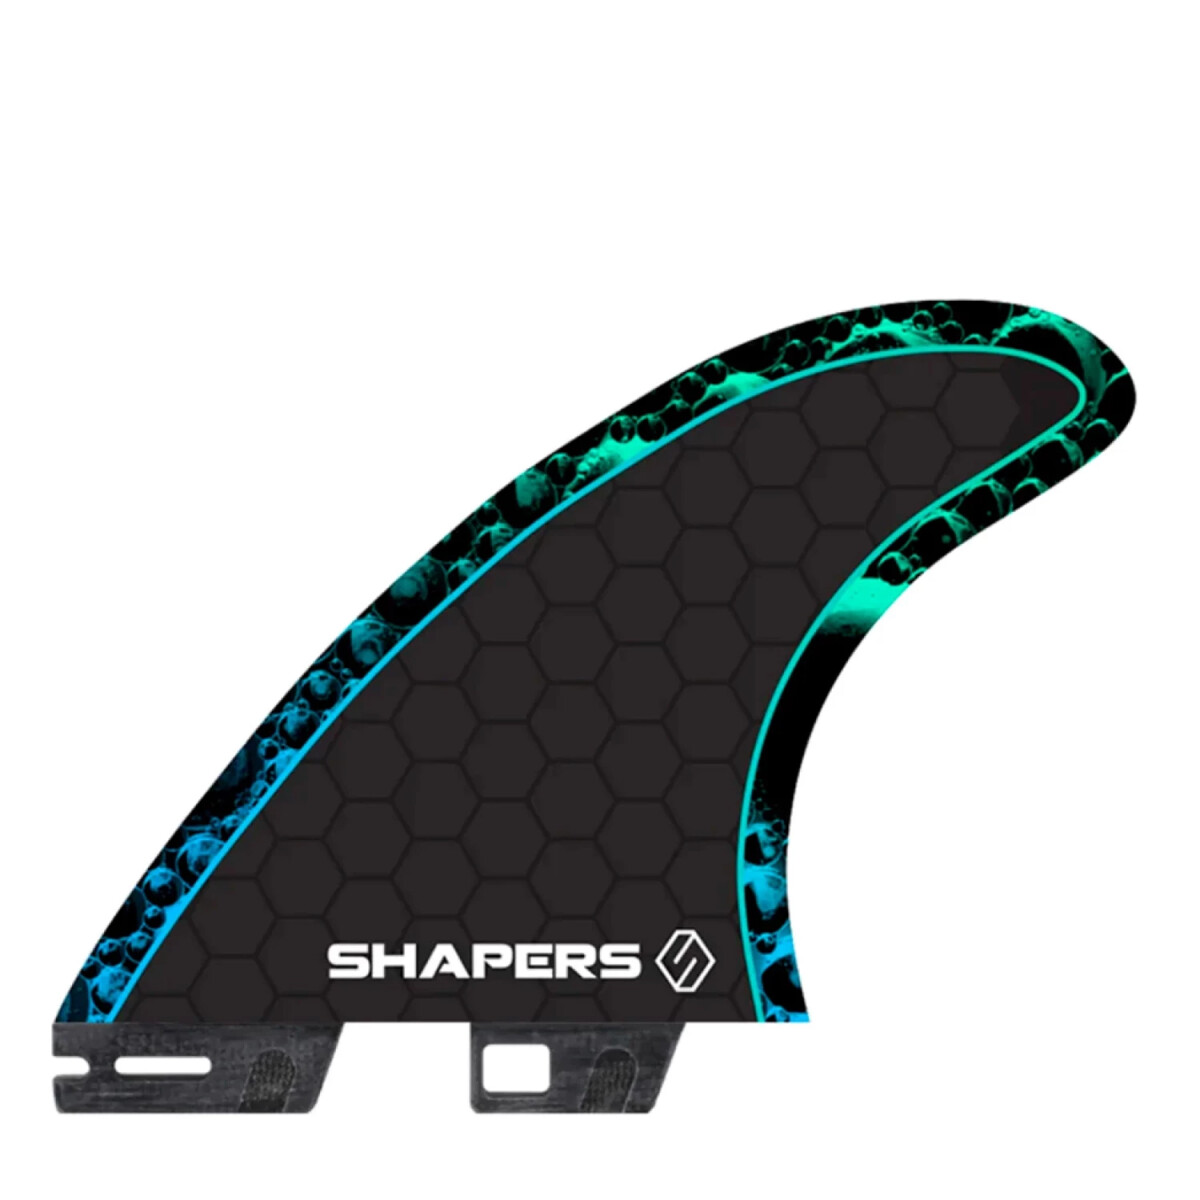 Quilla Shapers Reef Heazlewood Stealth L (FCS ll) 